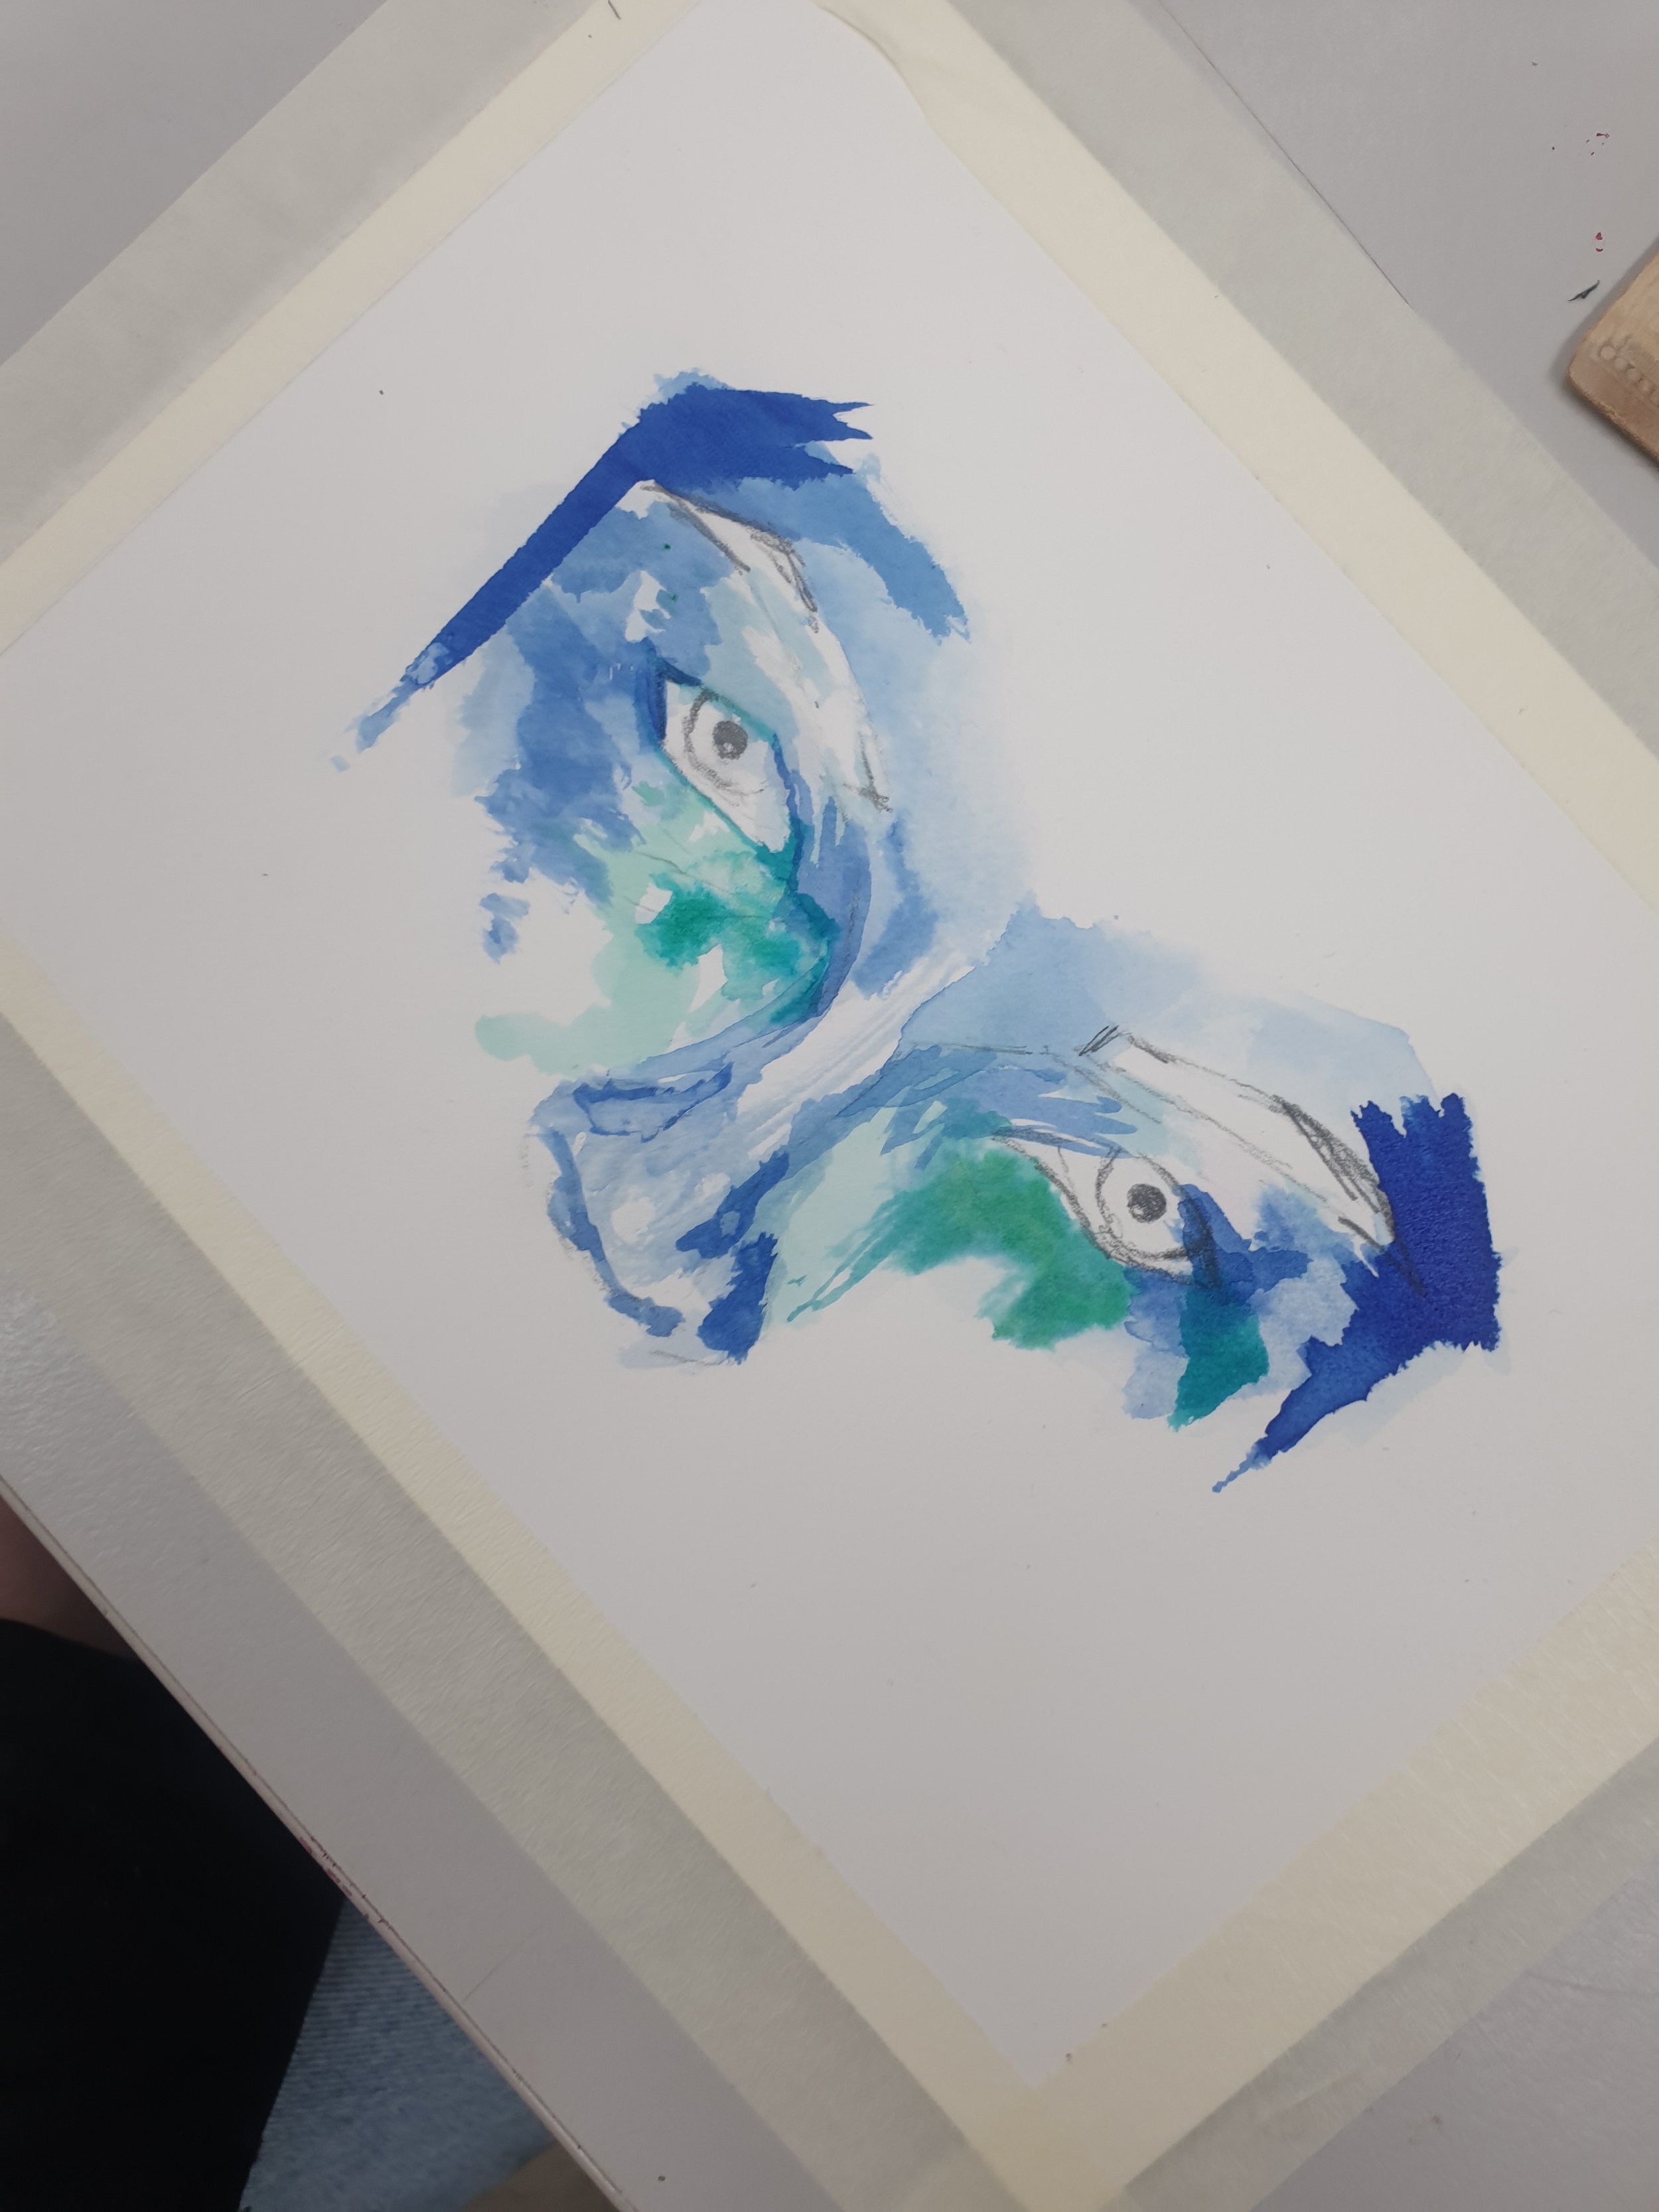 Watercolour and Ink Workshop